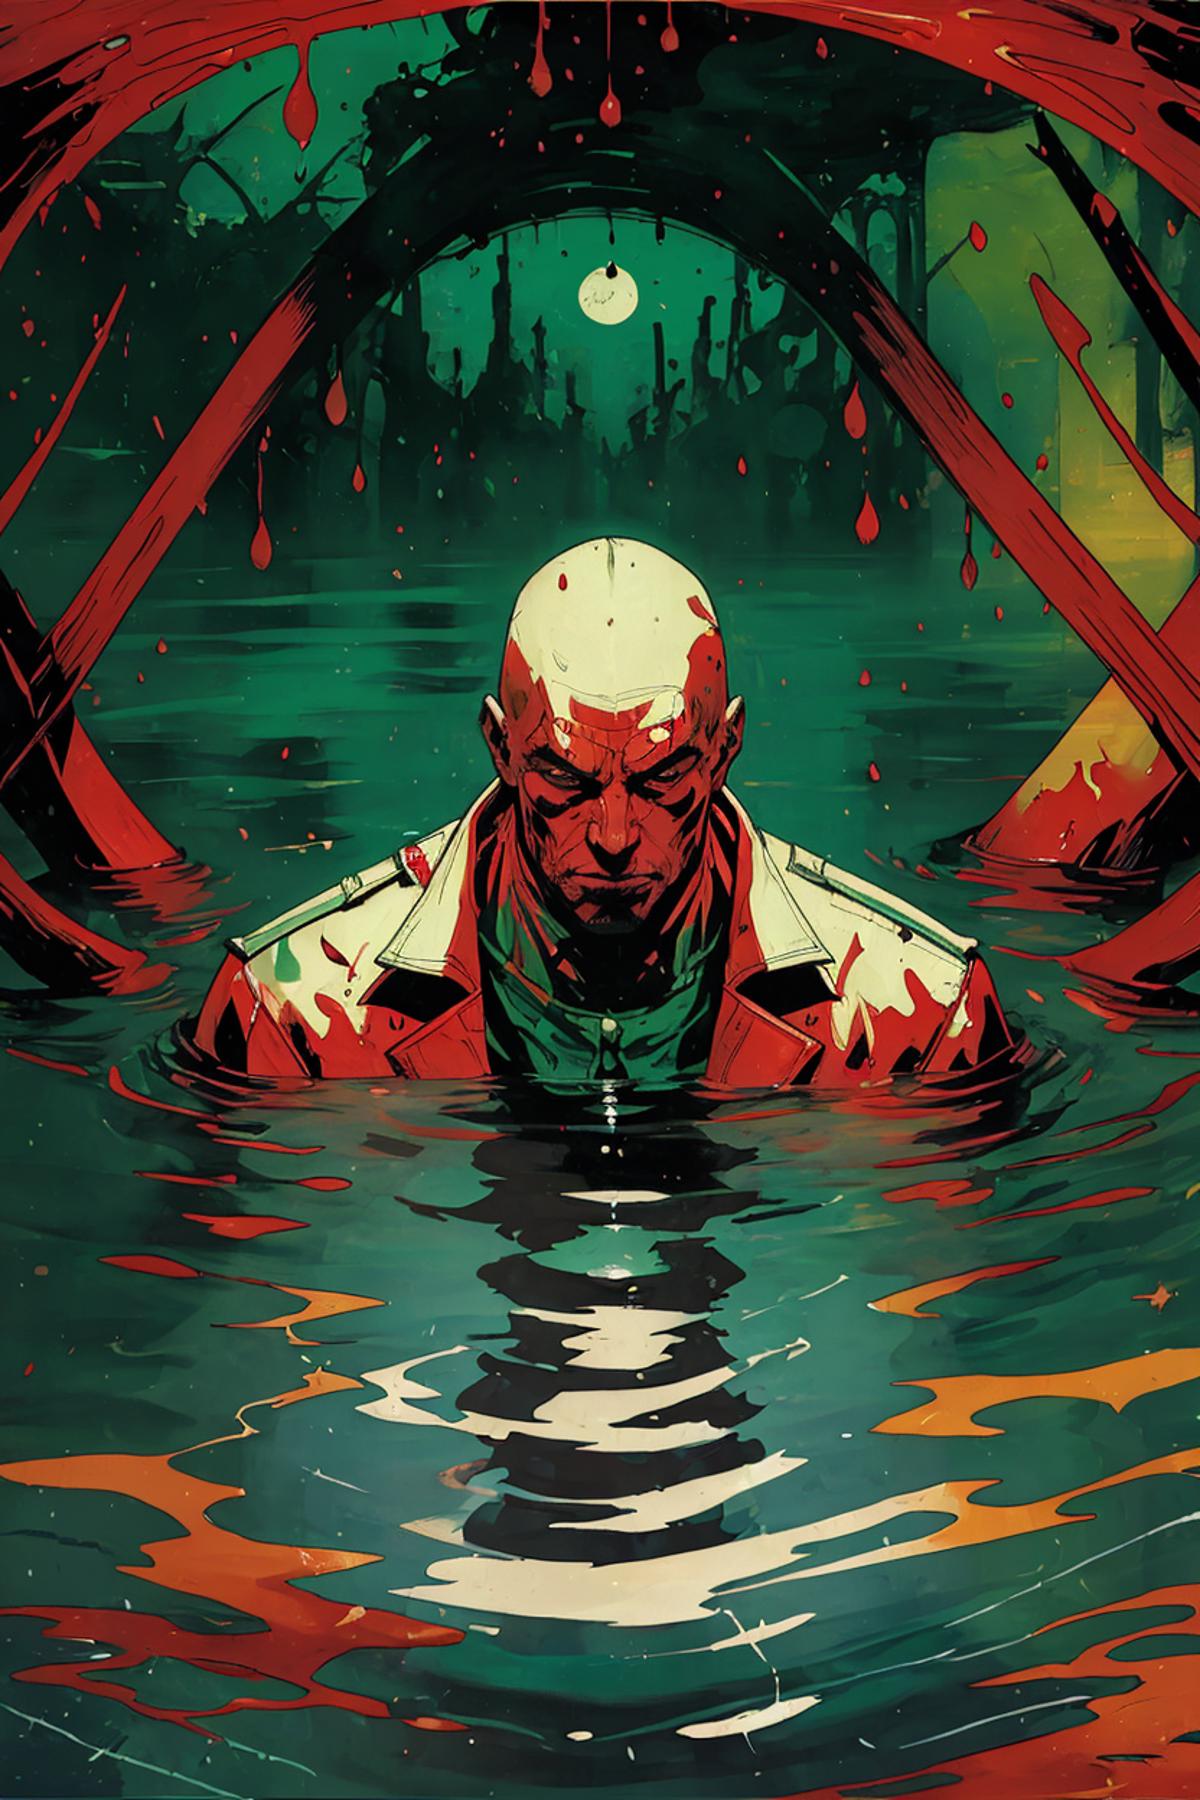 A man with a shaved head, red jacket, and green shirt sitting in a lake.